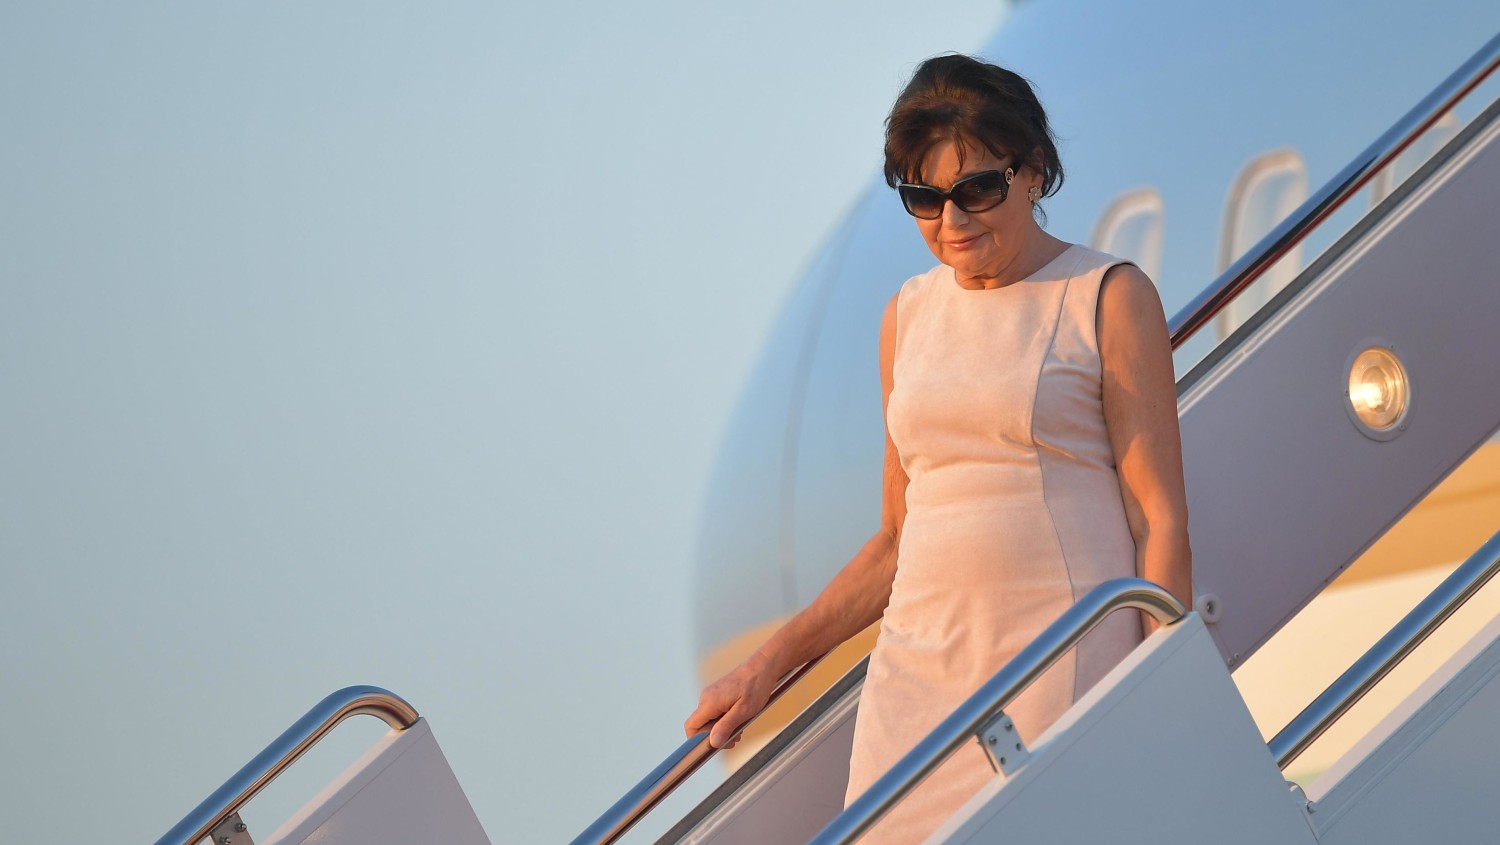 Amalija Knavs, the mother of former first lady Melania Trump, steps off Air Force One upon arrival at Andrews Air Force Base in Maryland, on June 11, 2017. Mandel Ngan/AFP/Getty Images